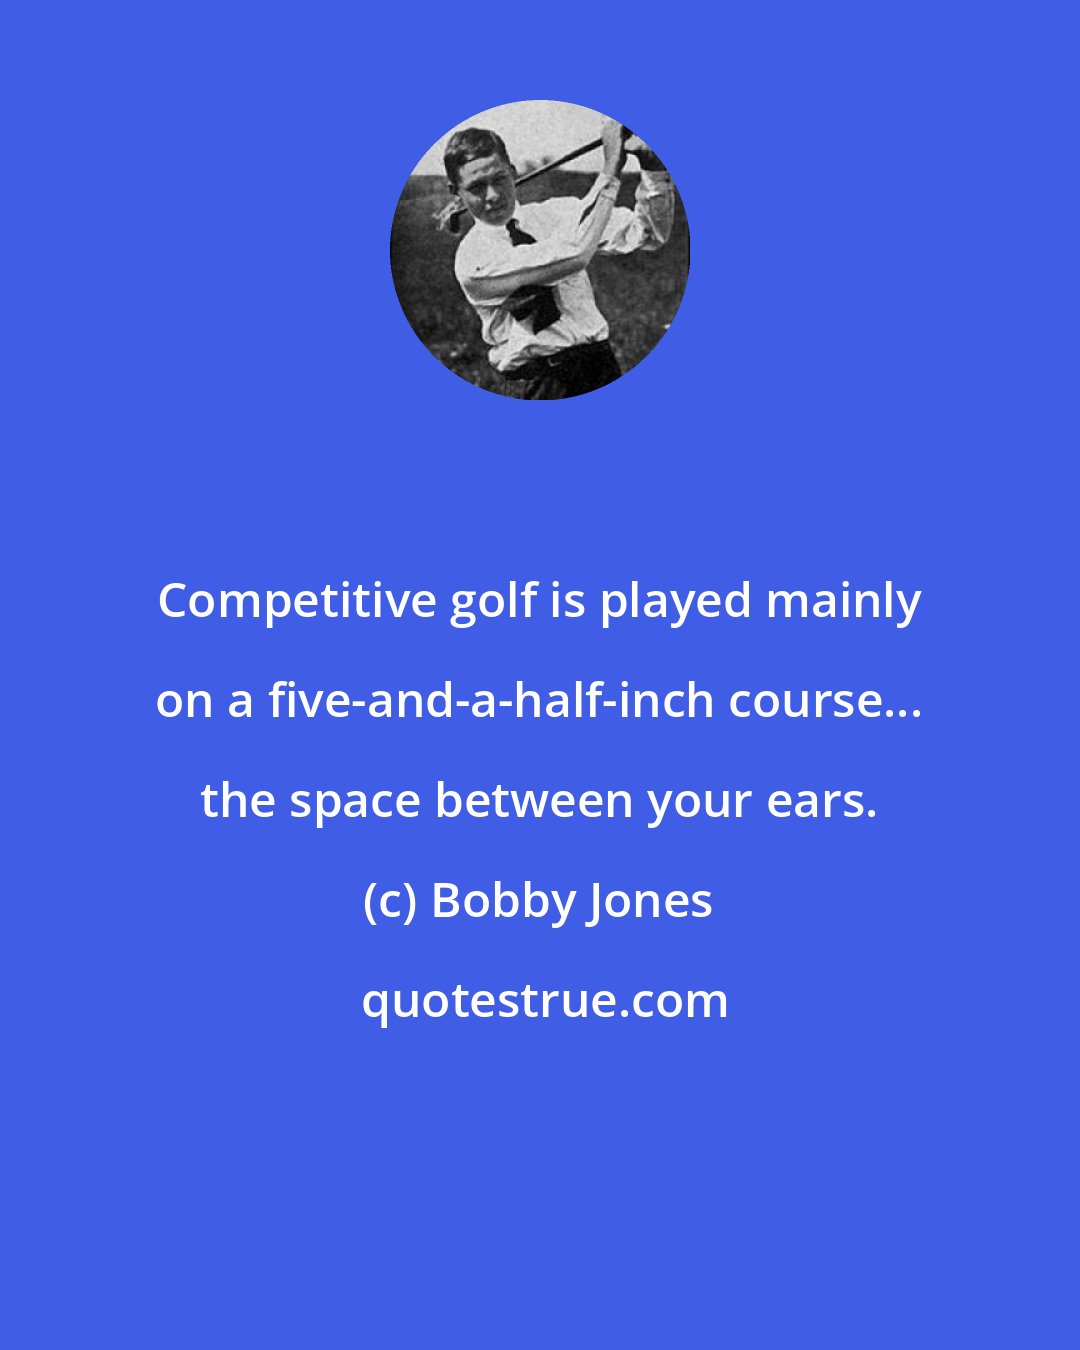 Bobby Jones: Competitive golf is played mainly on a five-and-a-half-inch course... the space between your ears.